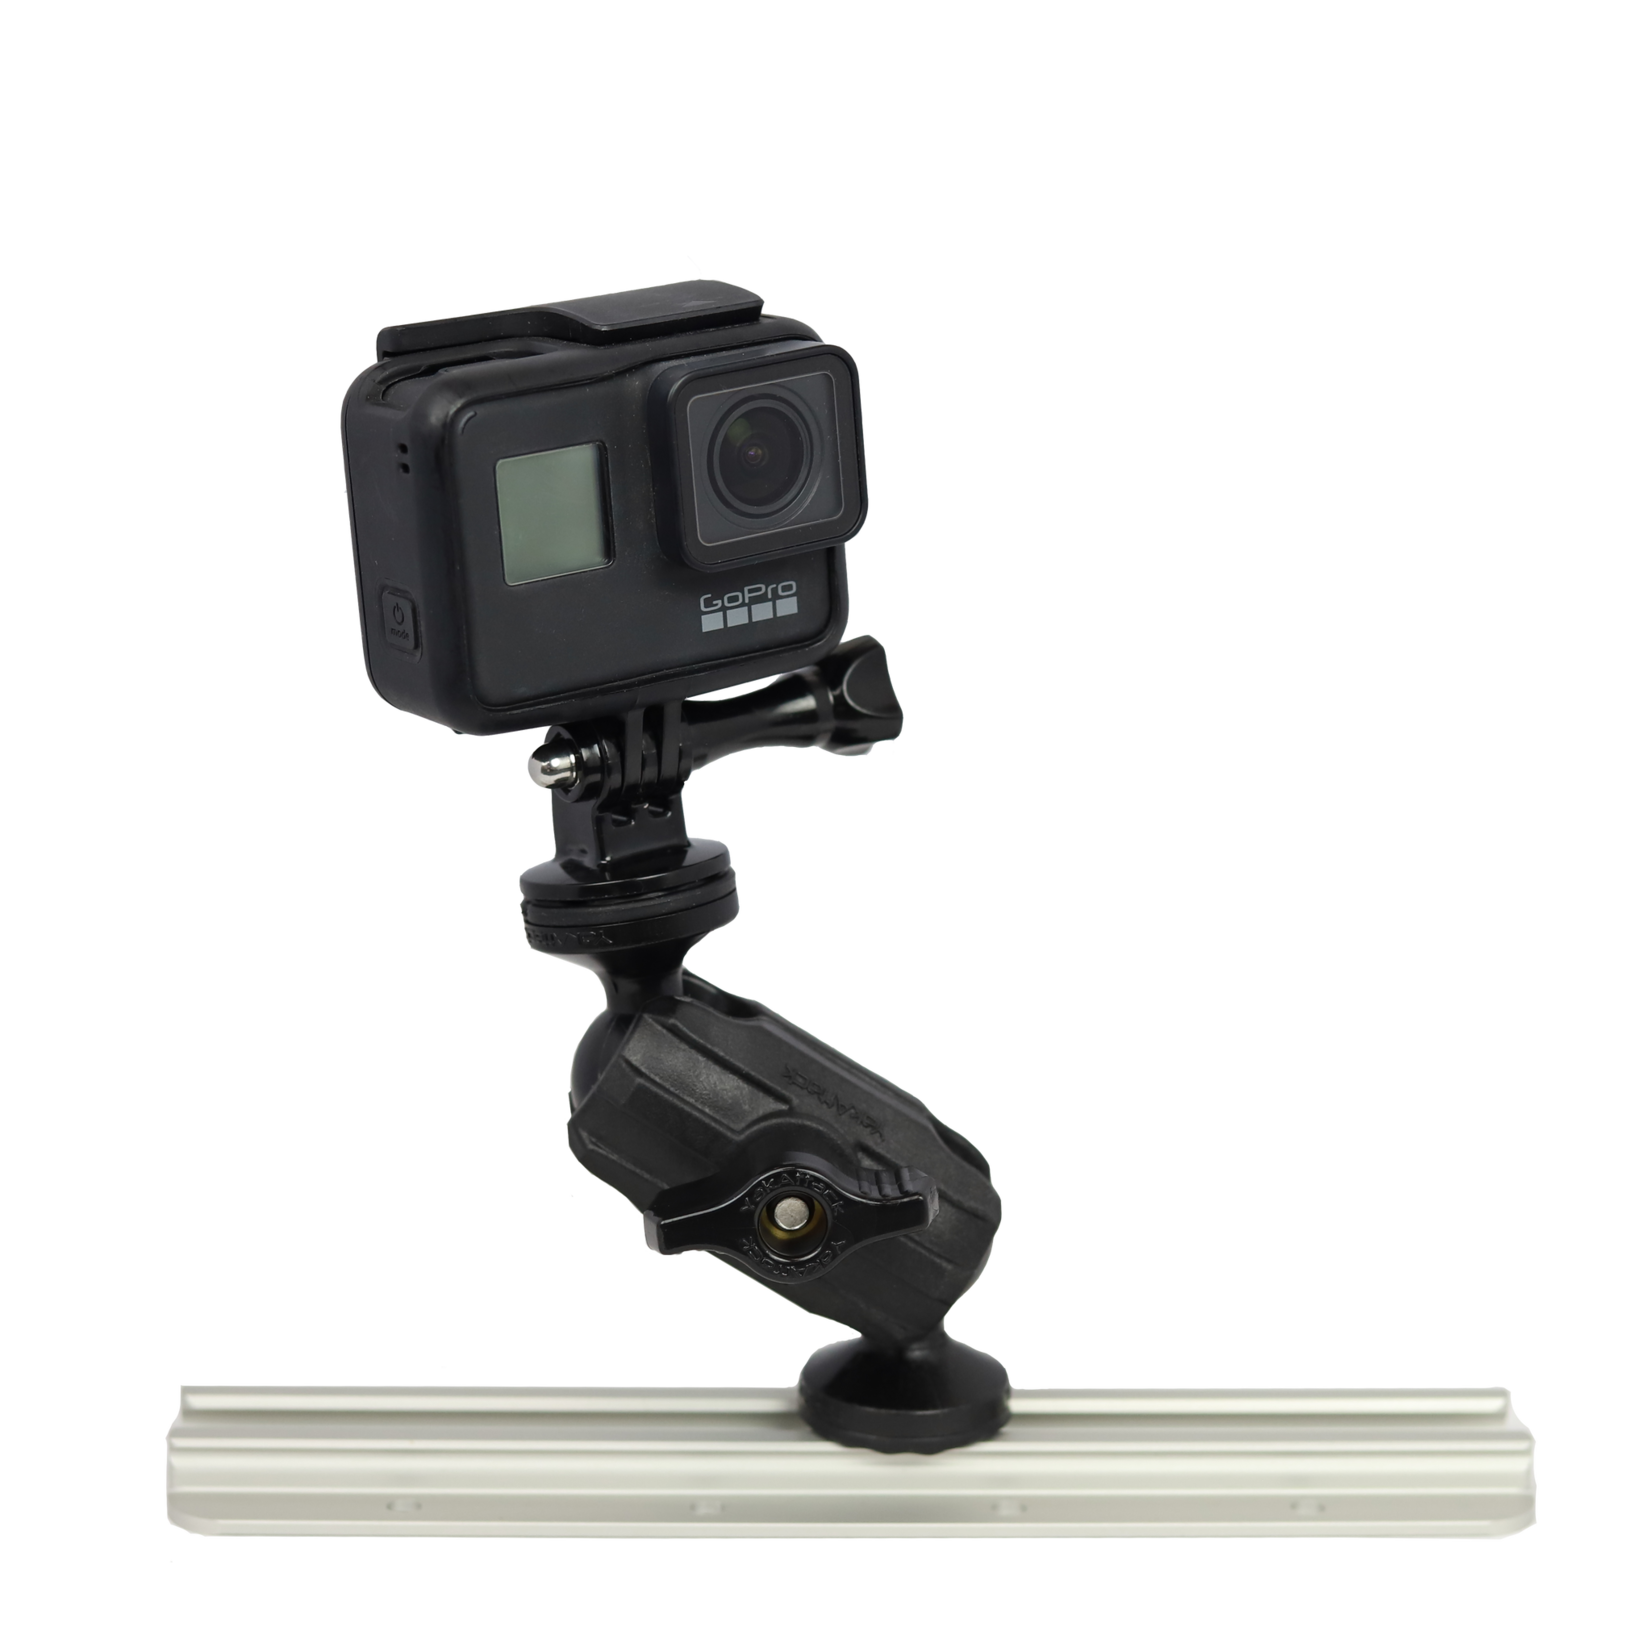 Yakattack Articulating Pro Camera Mount, Includes 1/4"-20 mount and GoPro